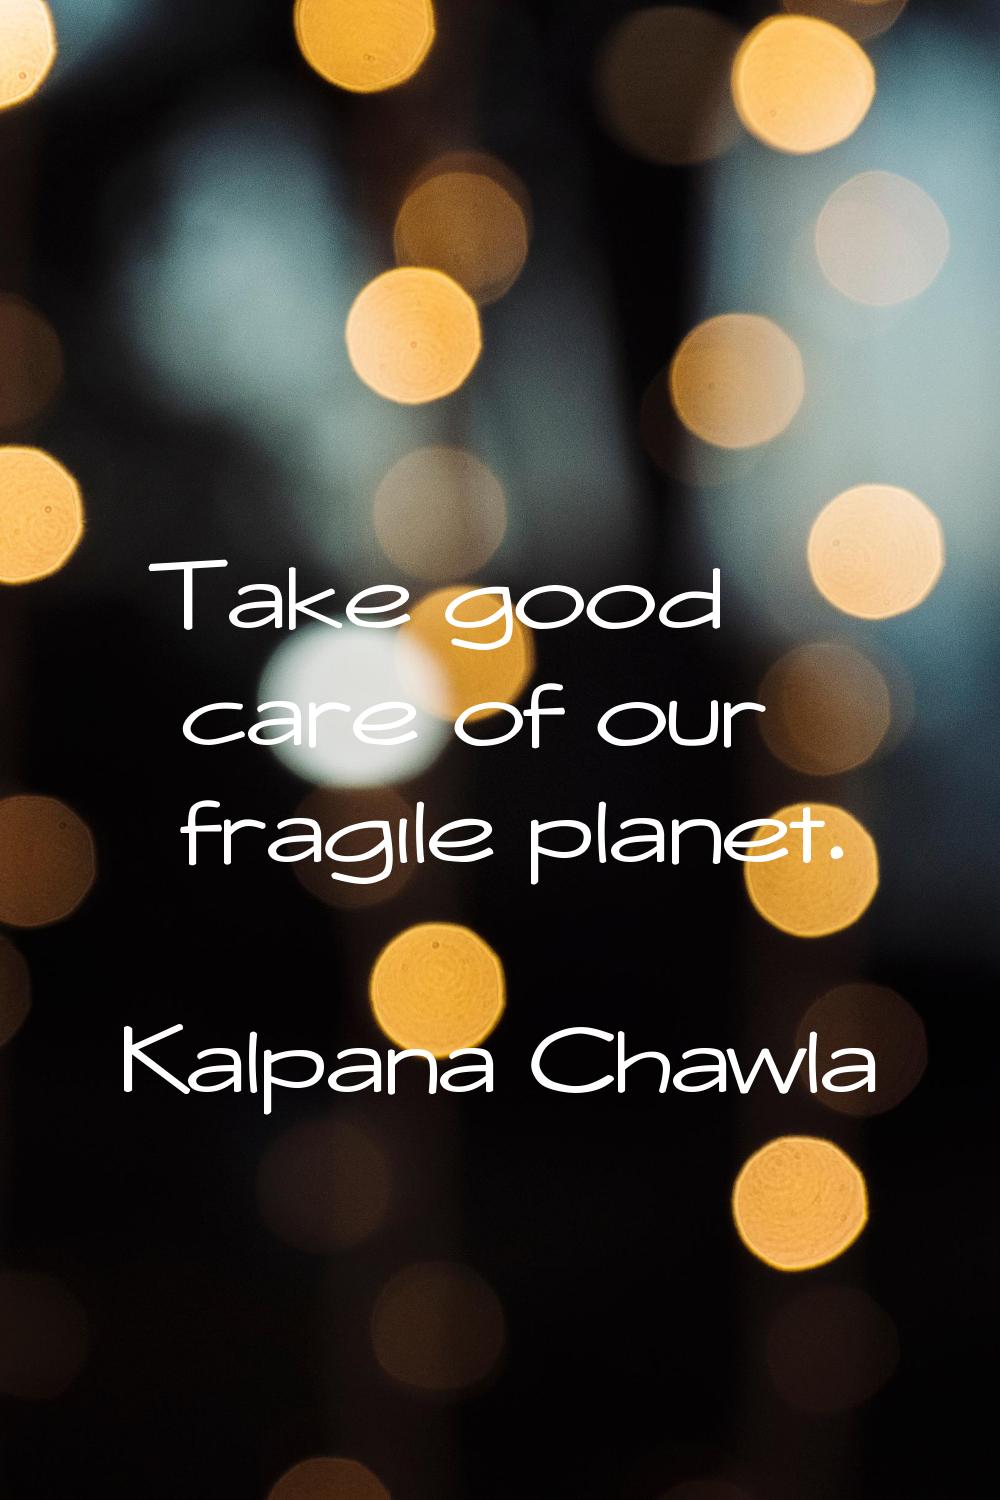 Take good care of our fragile planet.